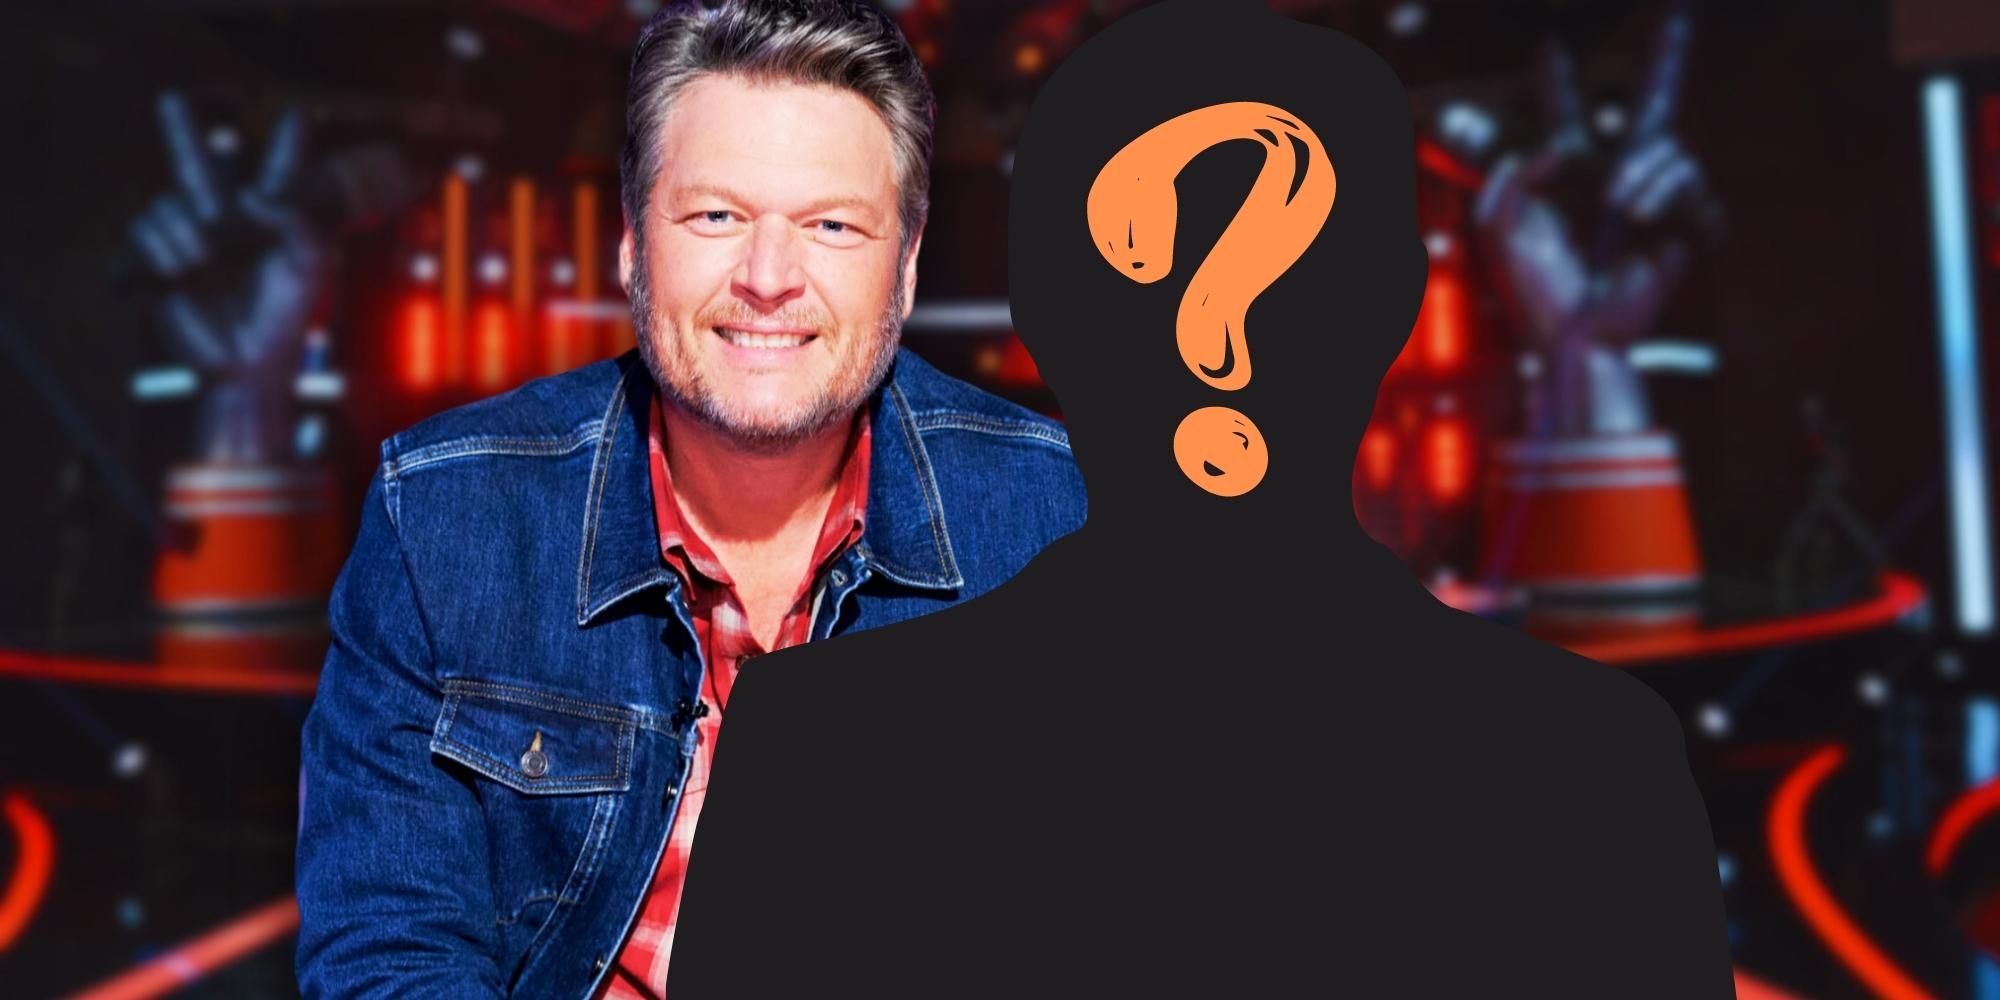 Blake Shelton on the Voice with a mystery person